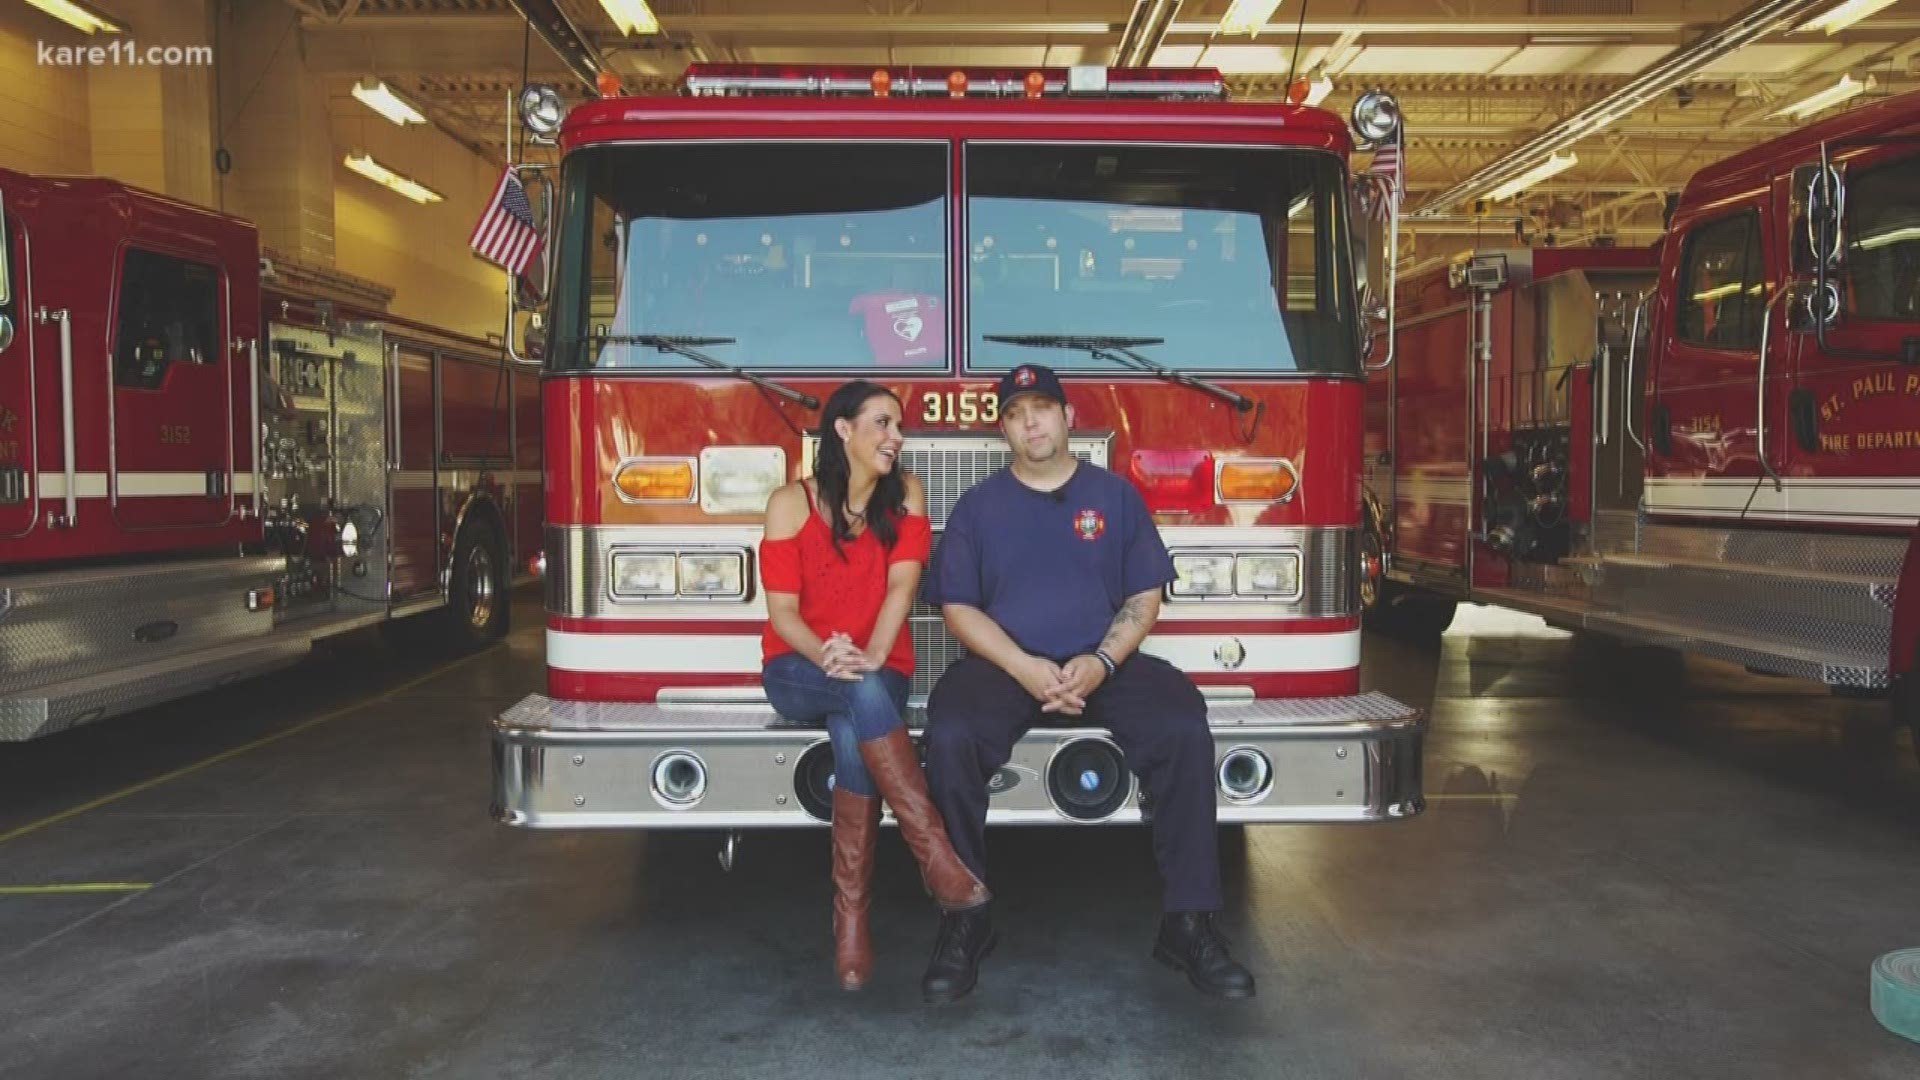 When the alarm sounded, St. Paul Park firefighter Jeremy Bourasa left his own wedding. "I've got the rest of my life with him," Krista said of her missing groom. "They needed him for that moment." Check out Boyd Huppert's latest edition of Land of 10,000